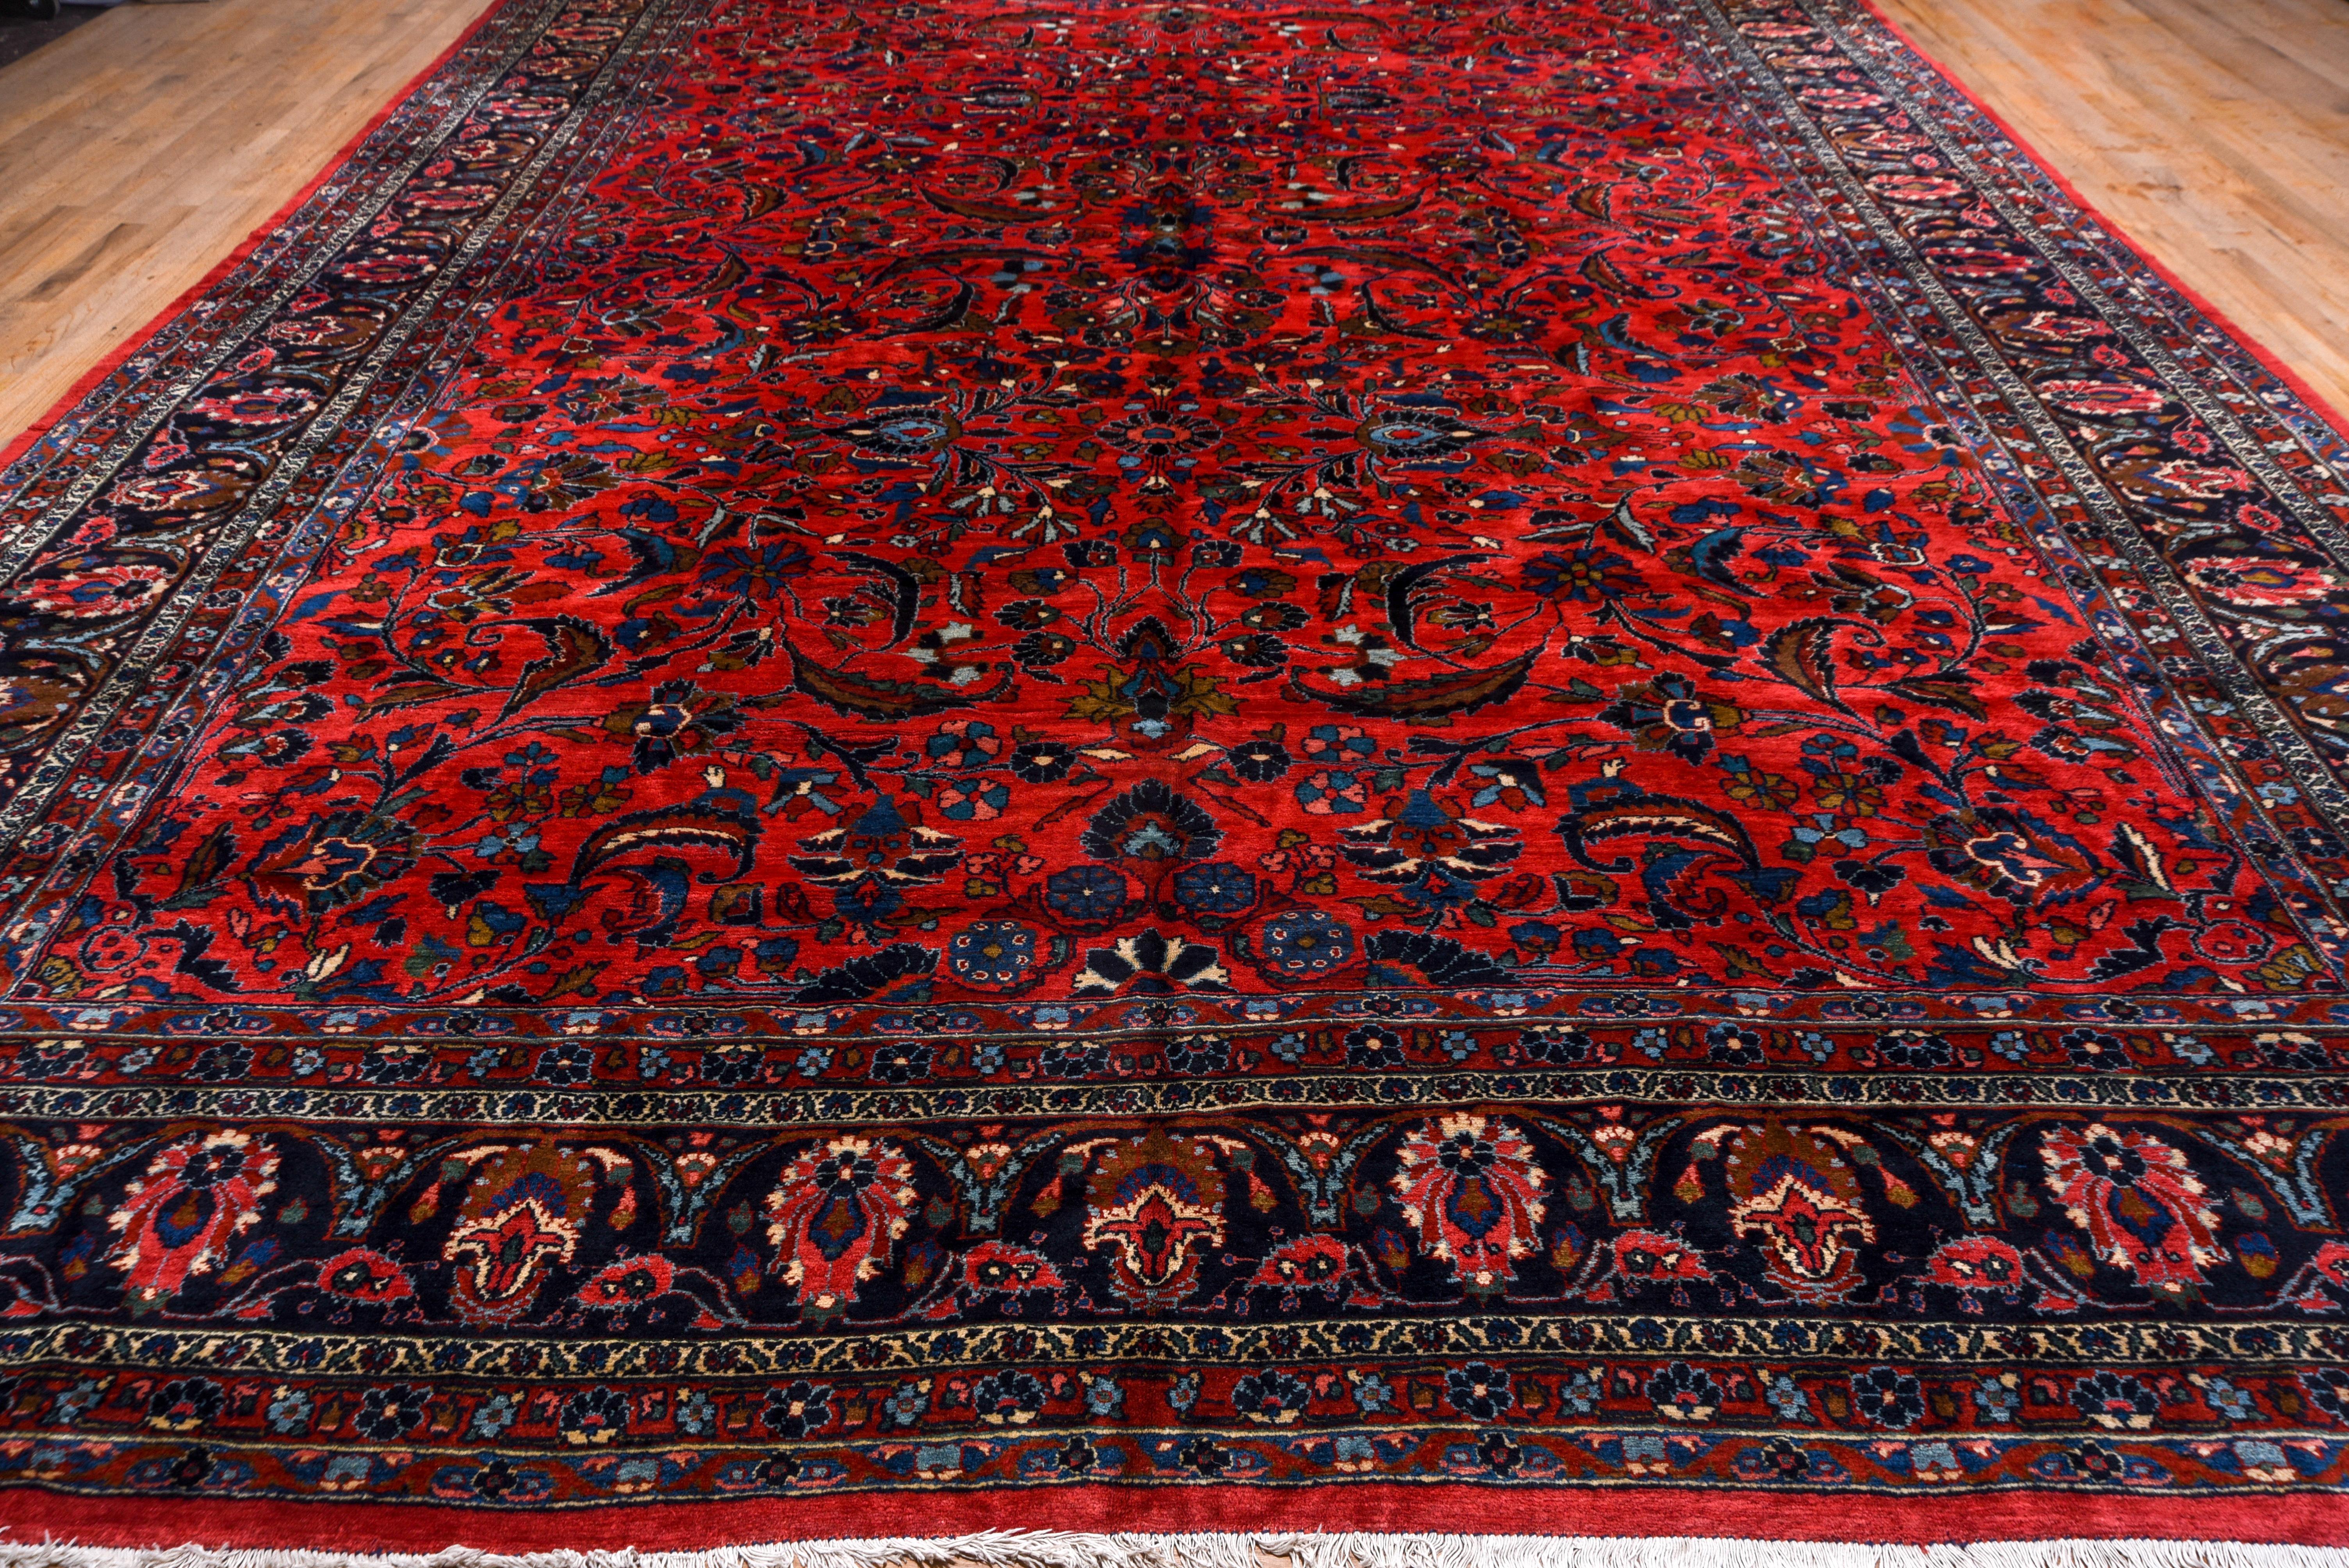 Hand-Knotted Palace Sized Antique Persian Red Lilian Carpet, circa 1920s For Sale